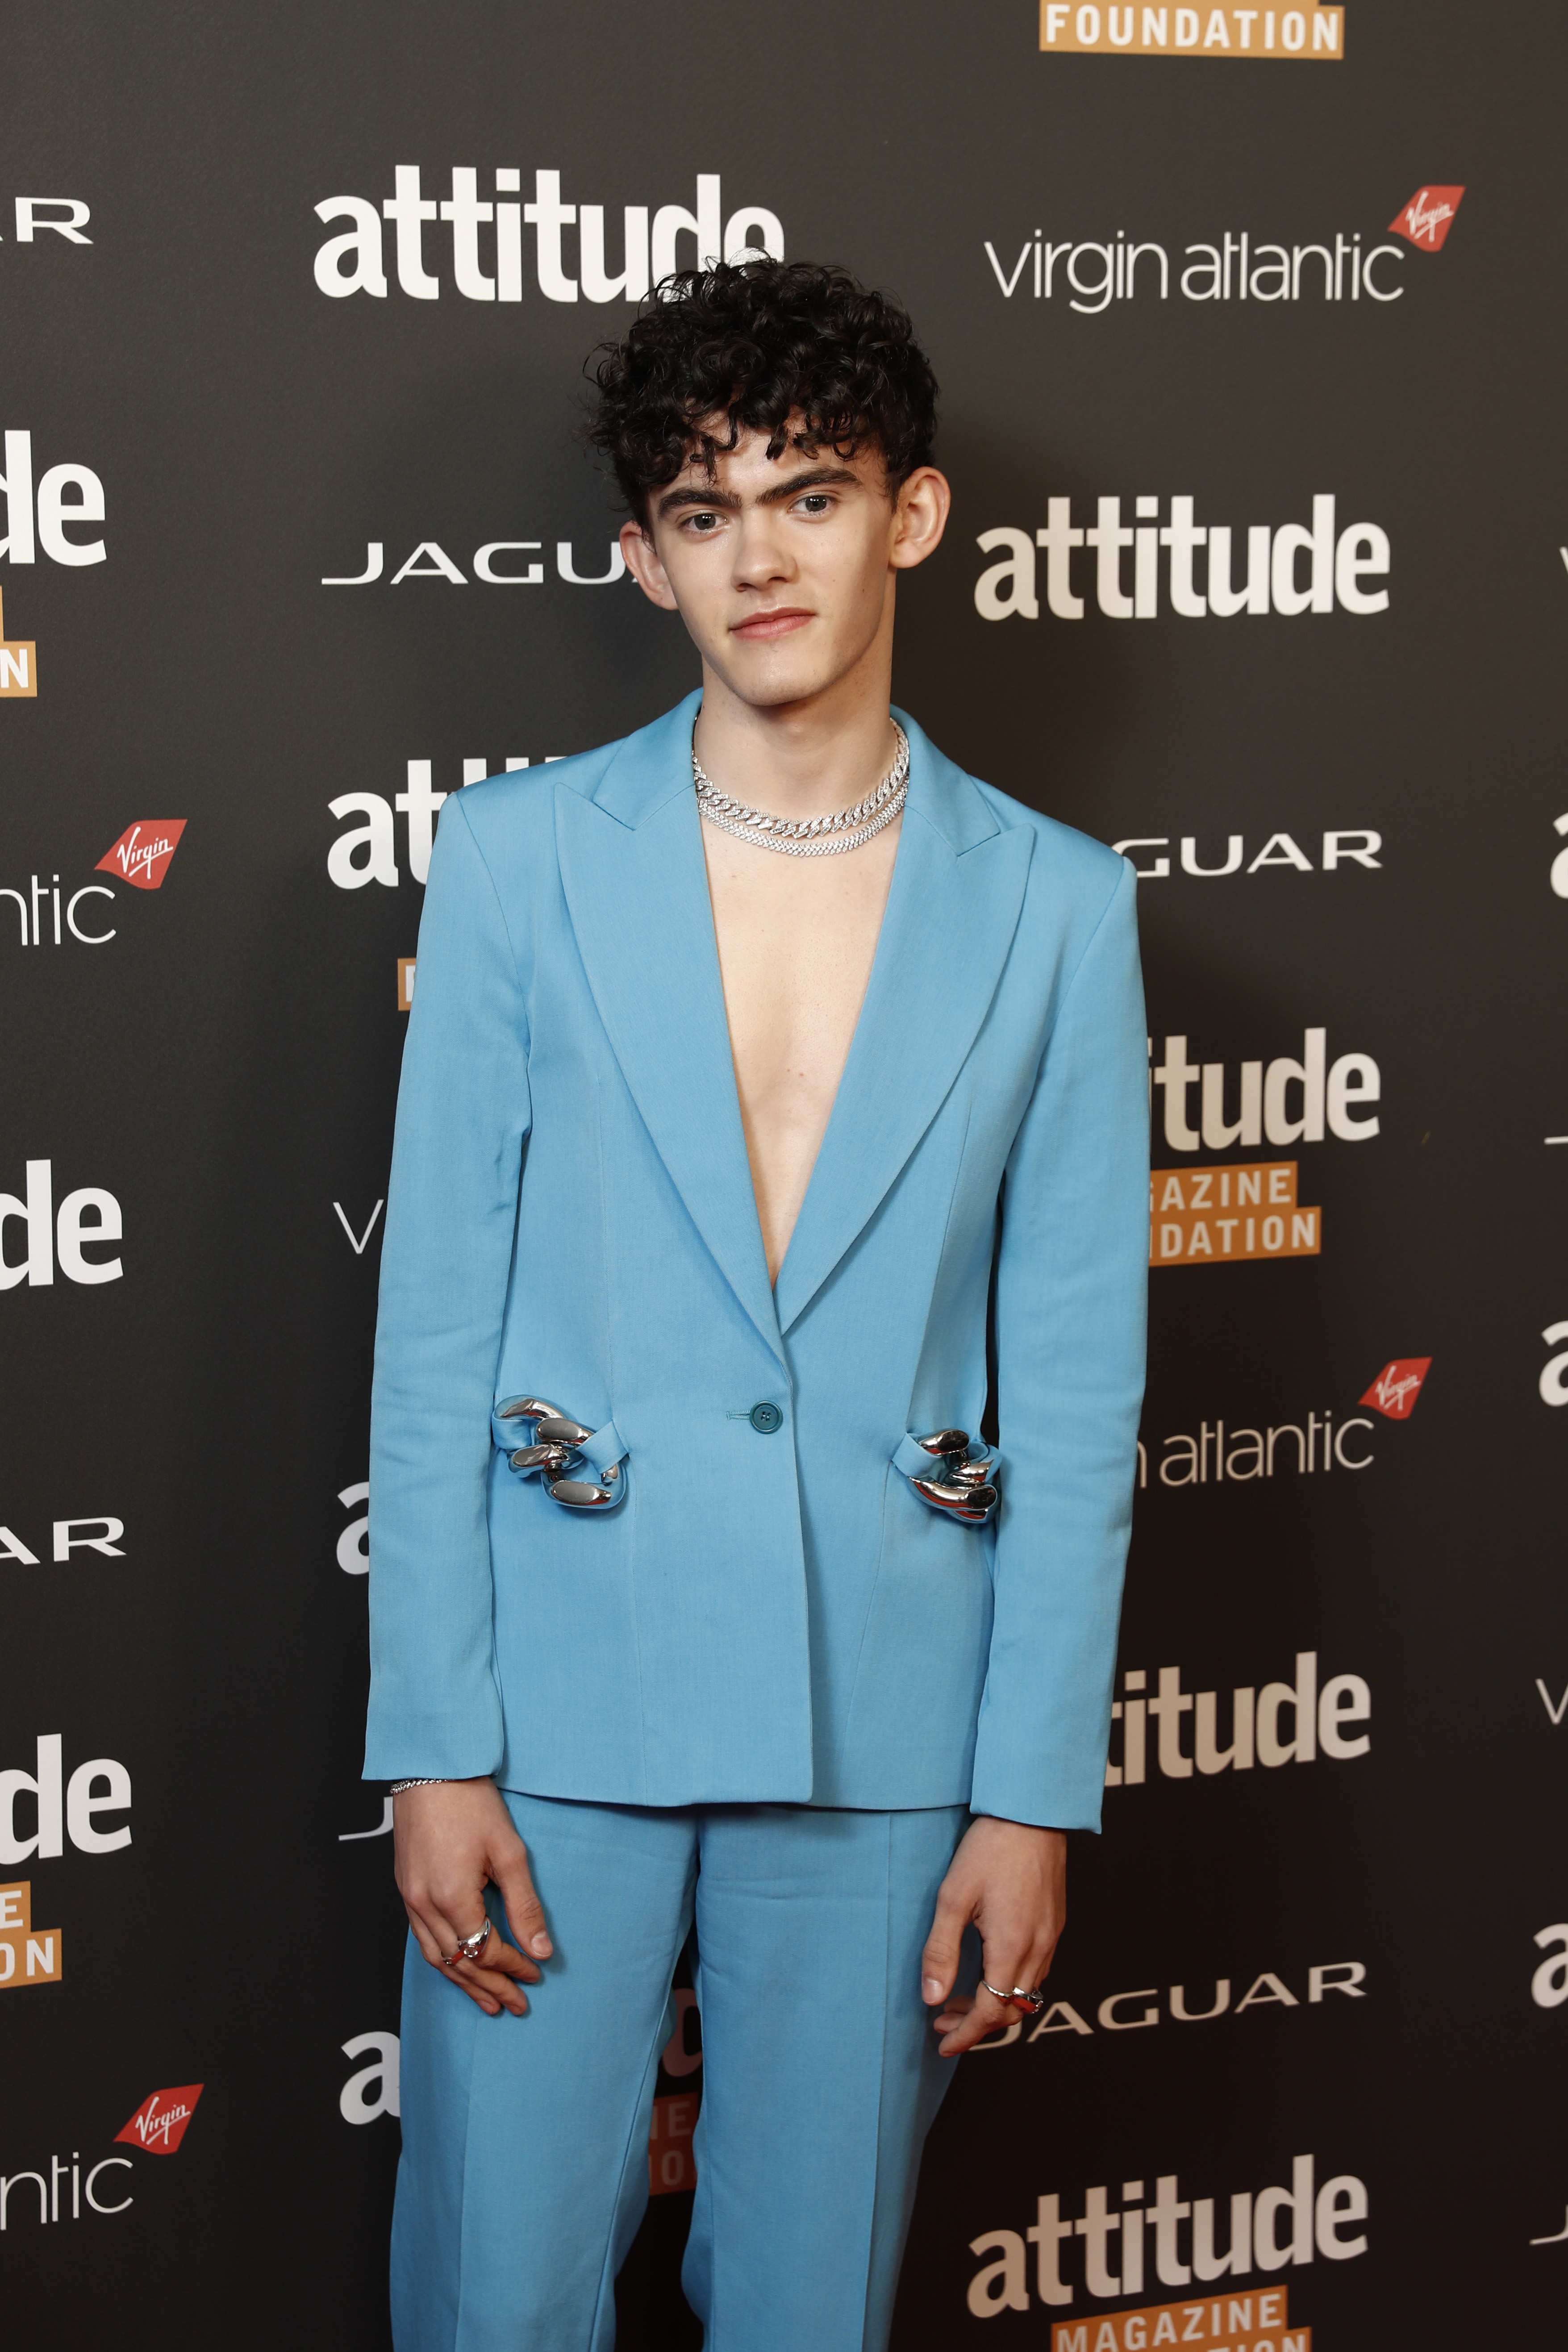 Joe Locke at the Attitude Awards 2022 on October 12, 2022, in London, England. | Source: Getty Images